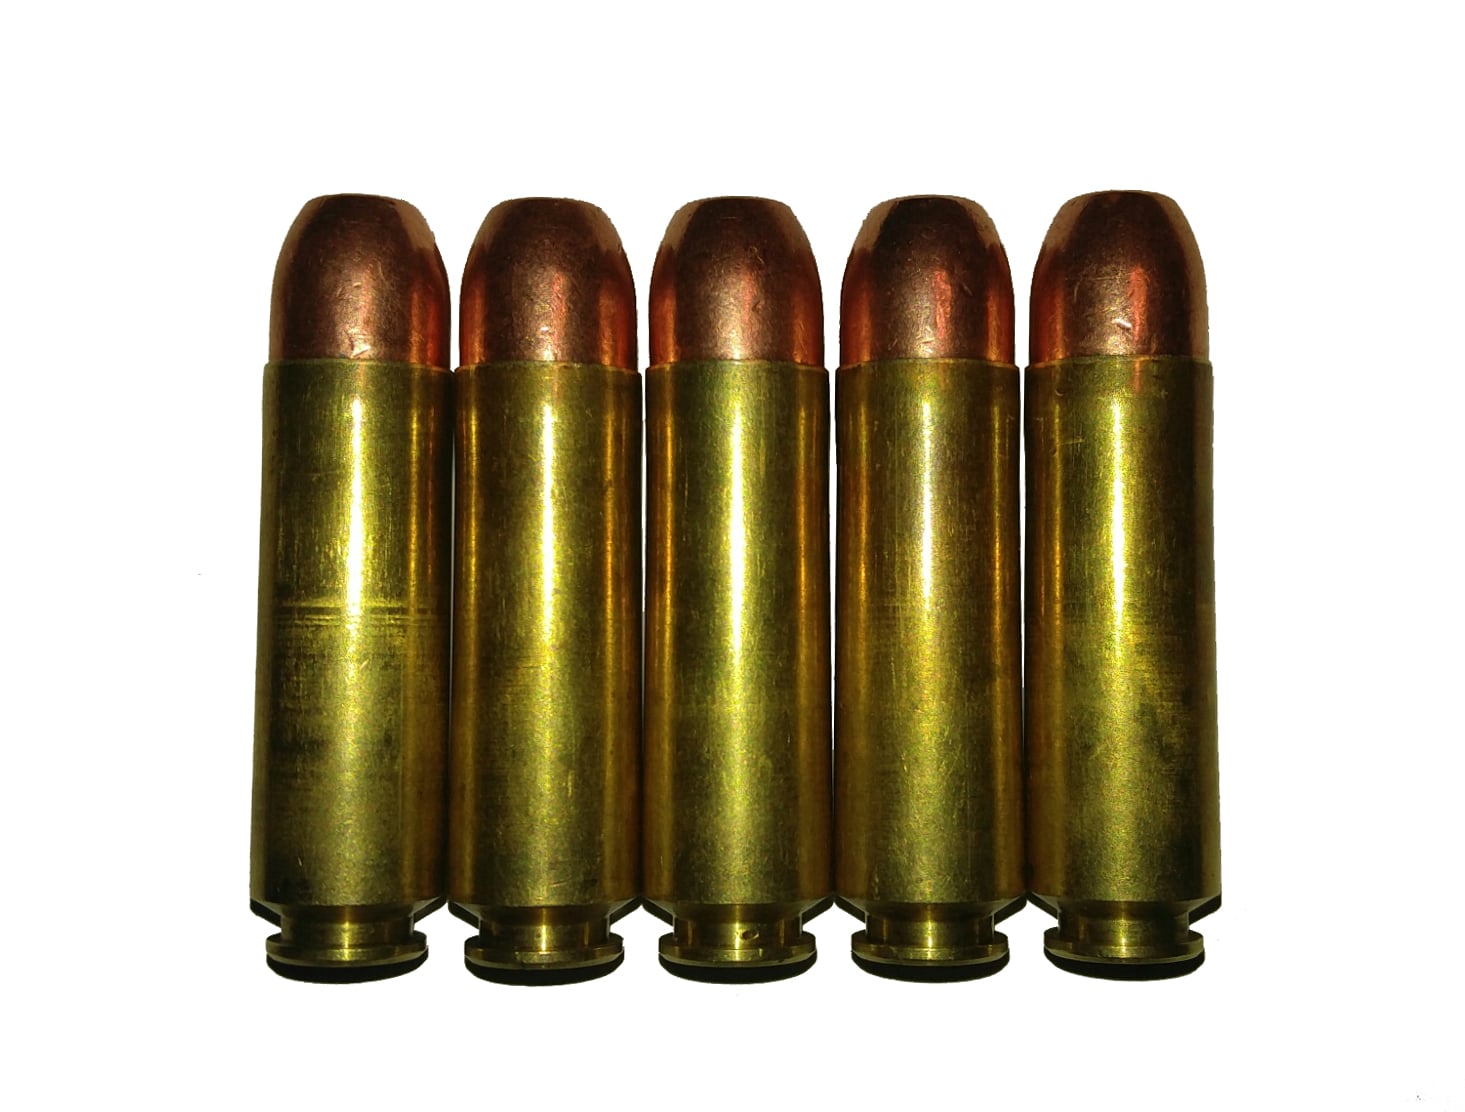 .50 Beowulf (12.7x42) Dummy Rounds Snap Caps Fake Bullets J&M Spec INERT